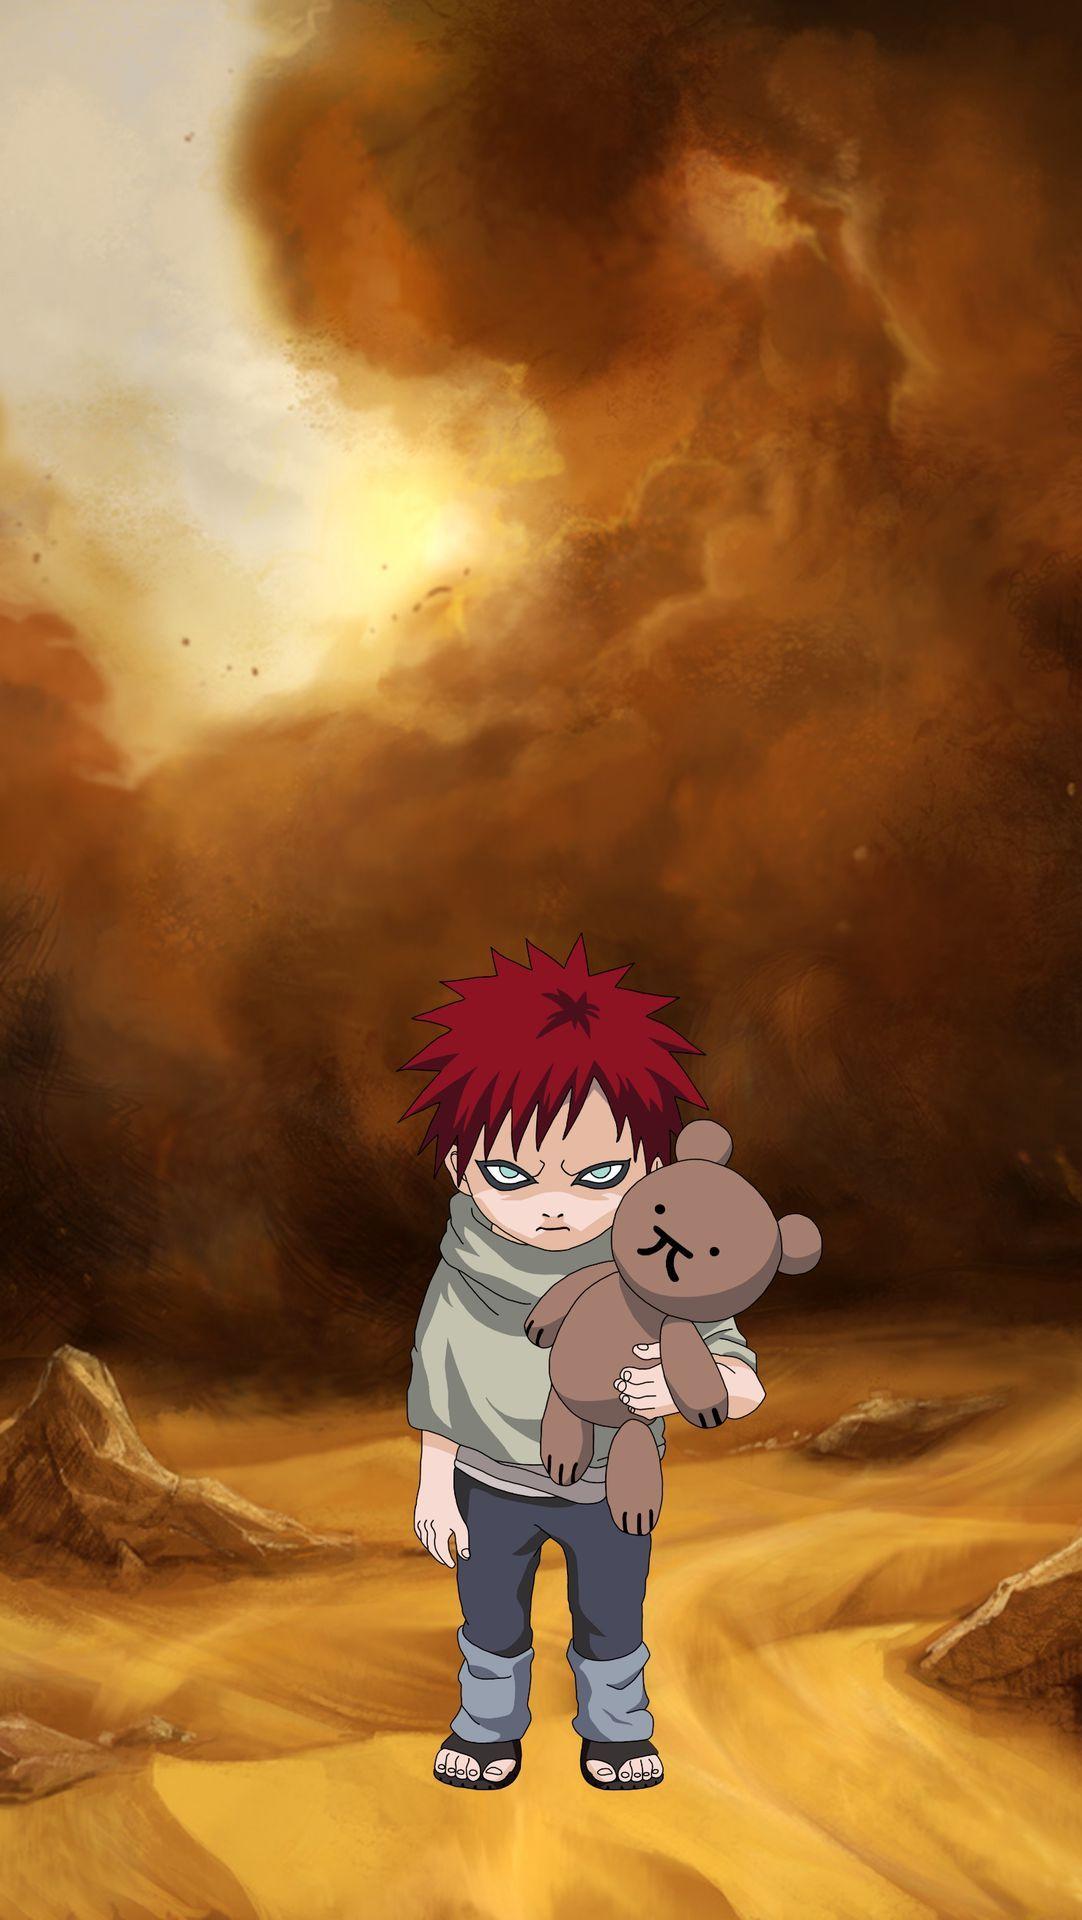 9 Gaara Wallpapers for iPhone and Android by Paul Tate